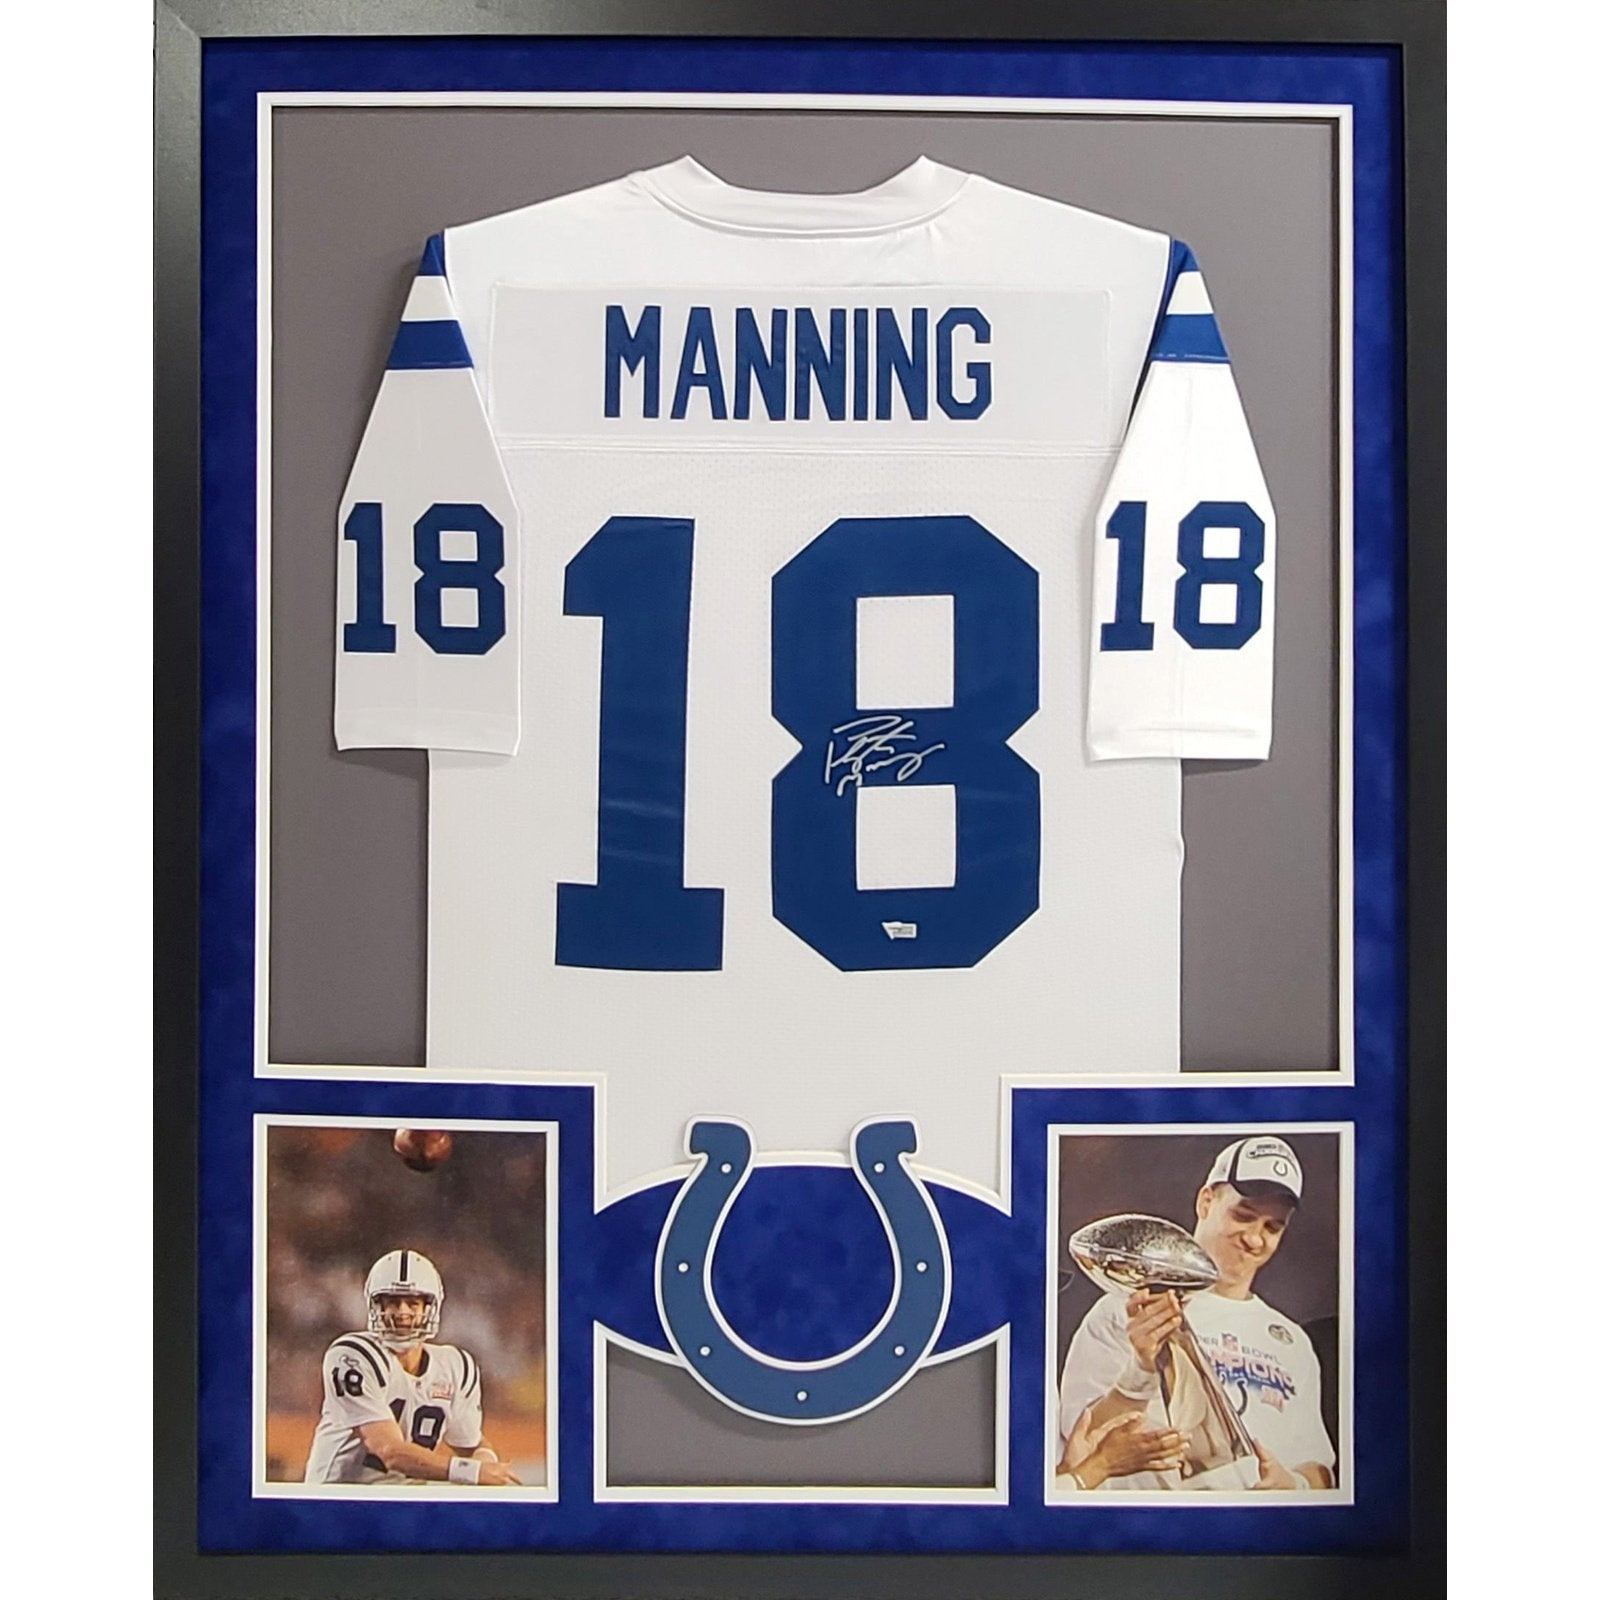 Peyton Manning Framed Signed Jersey Fanatics Indianapolis Colts Autographed